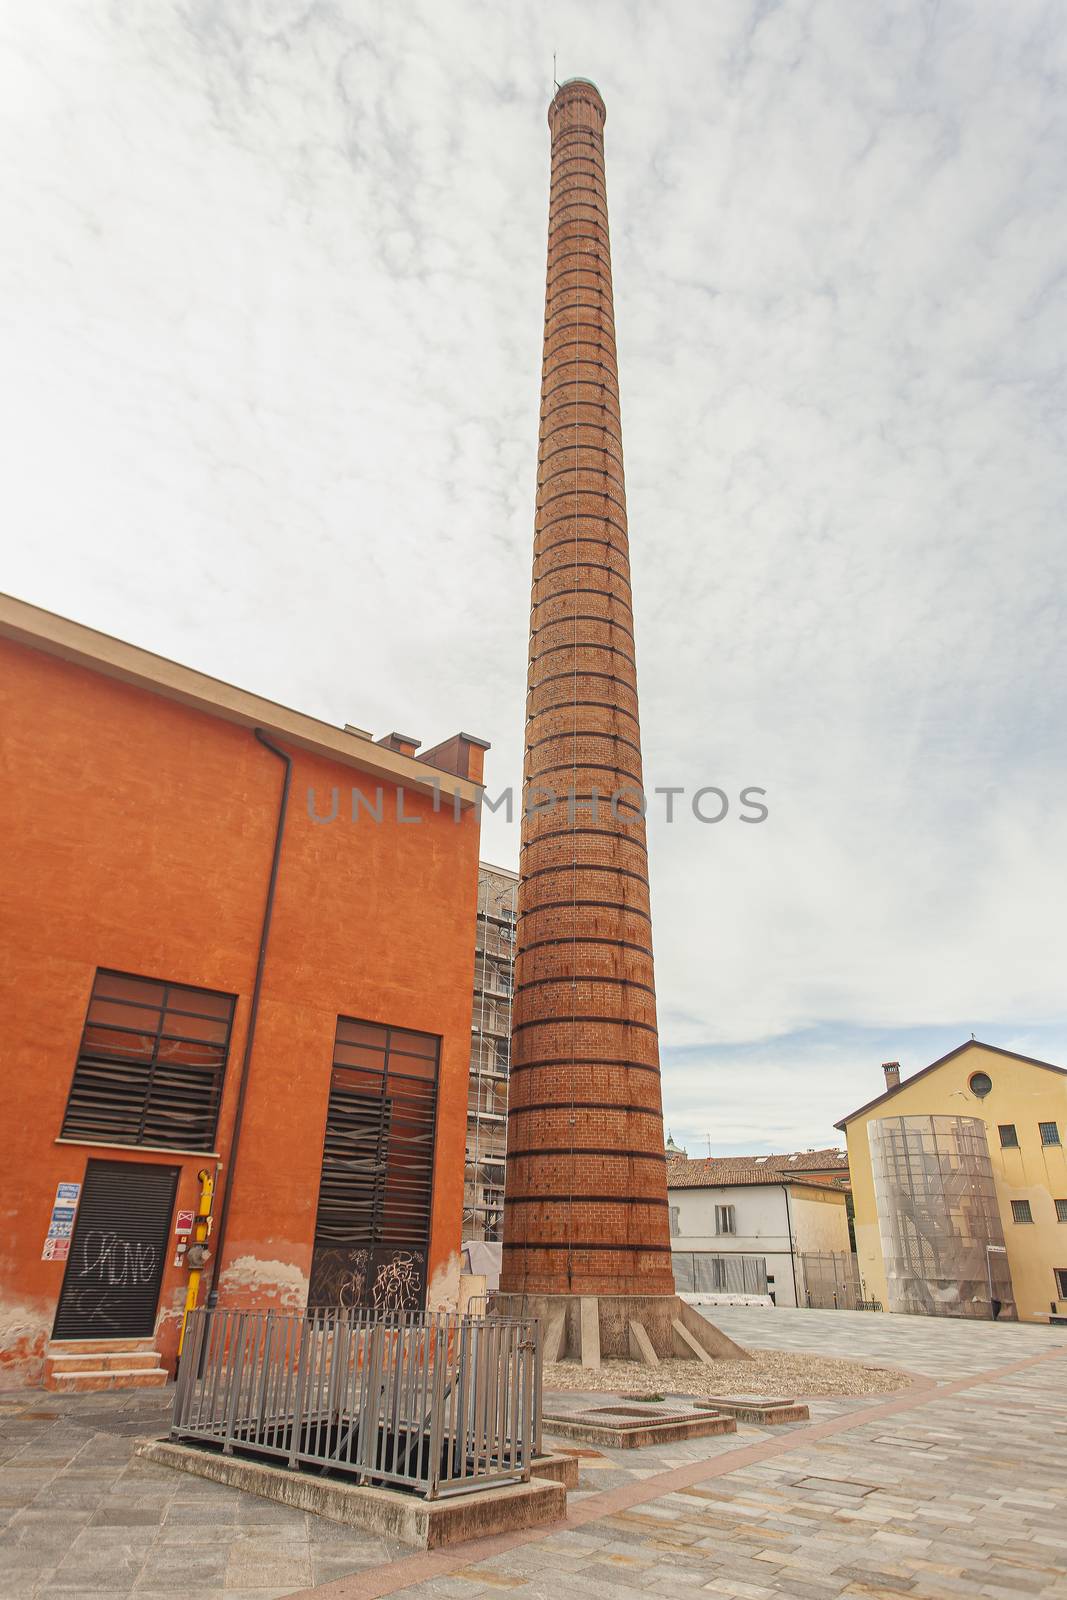 Detail of a Old Industrial building with chimney in Italy2 by pippocarlot